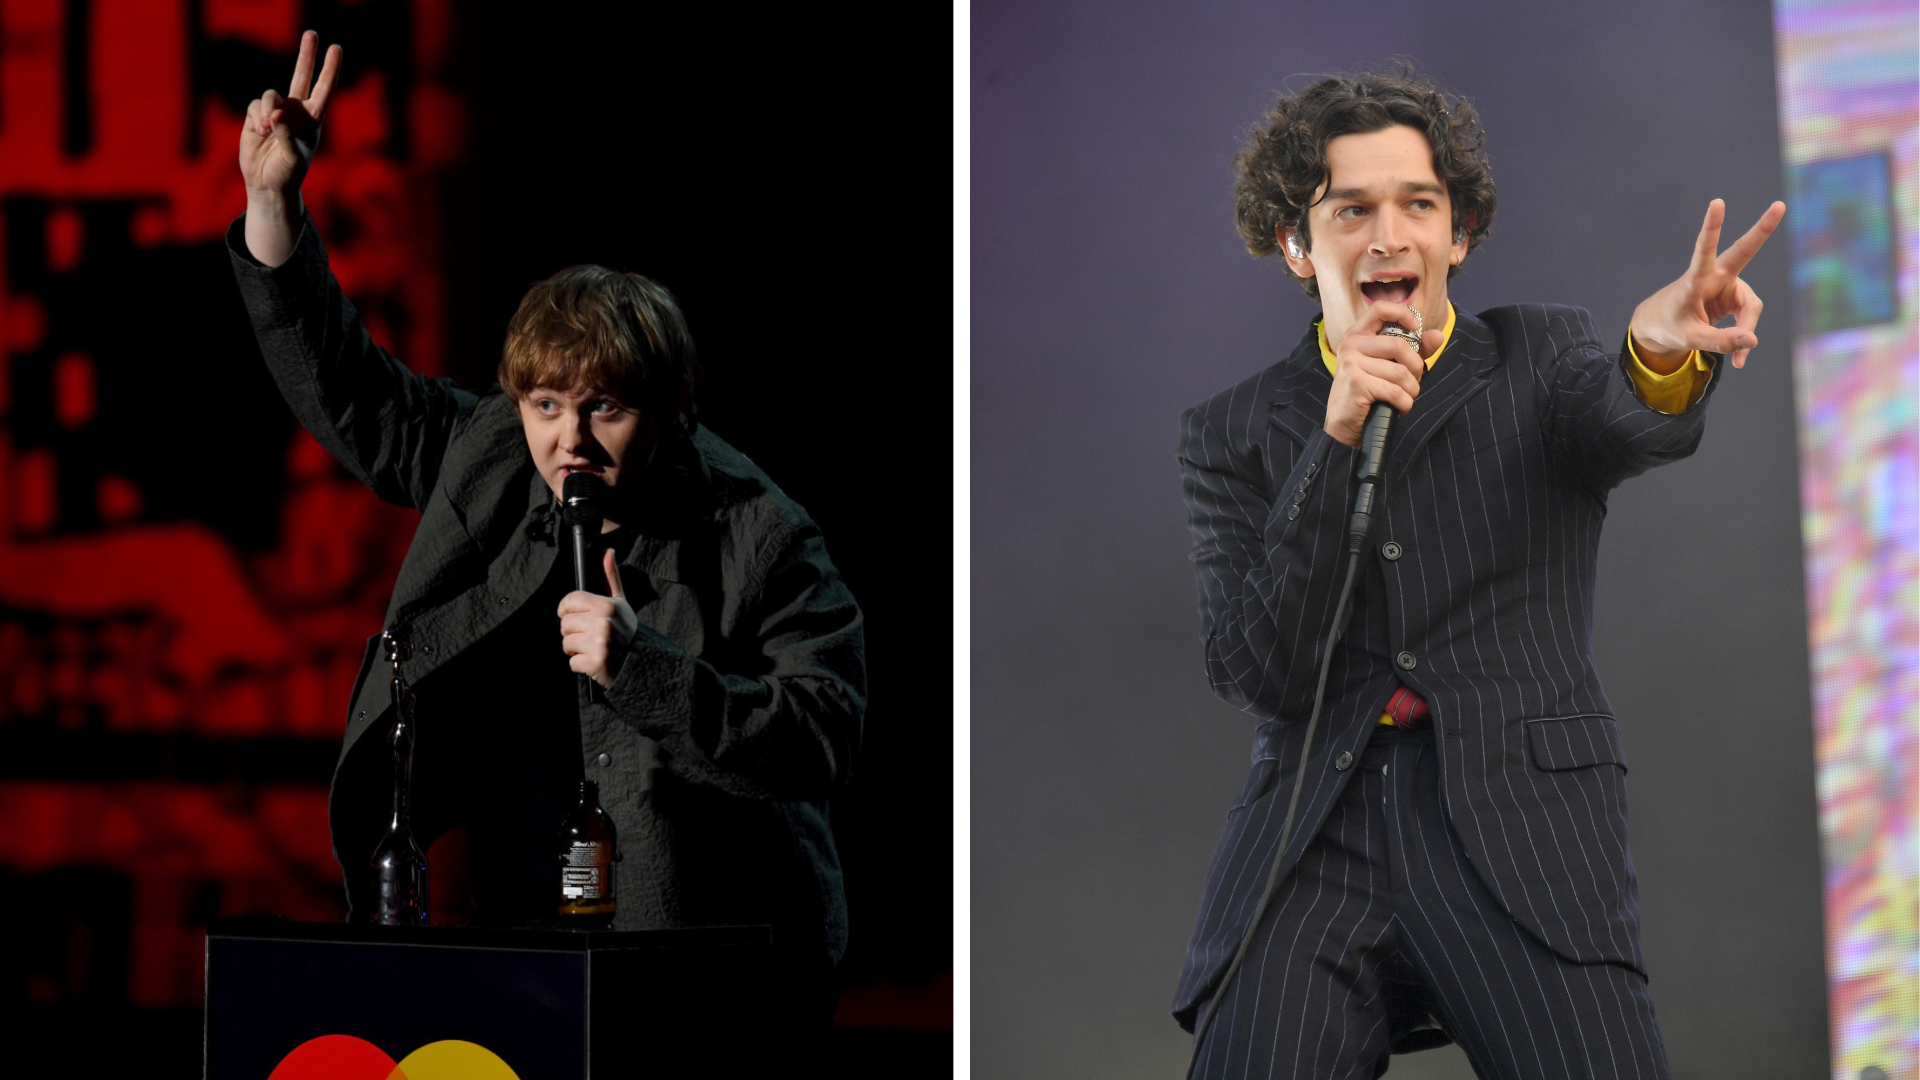 Lewis Capaldi and The 1975 were previously announced for Radio 1 Big Weekend in Dundee